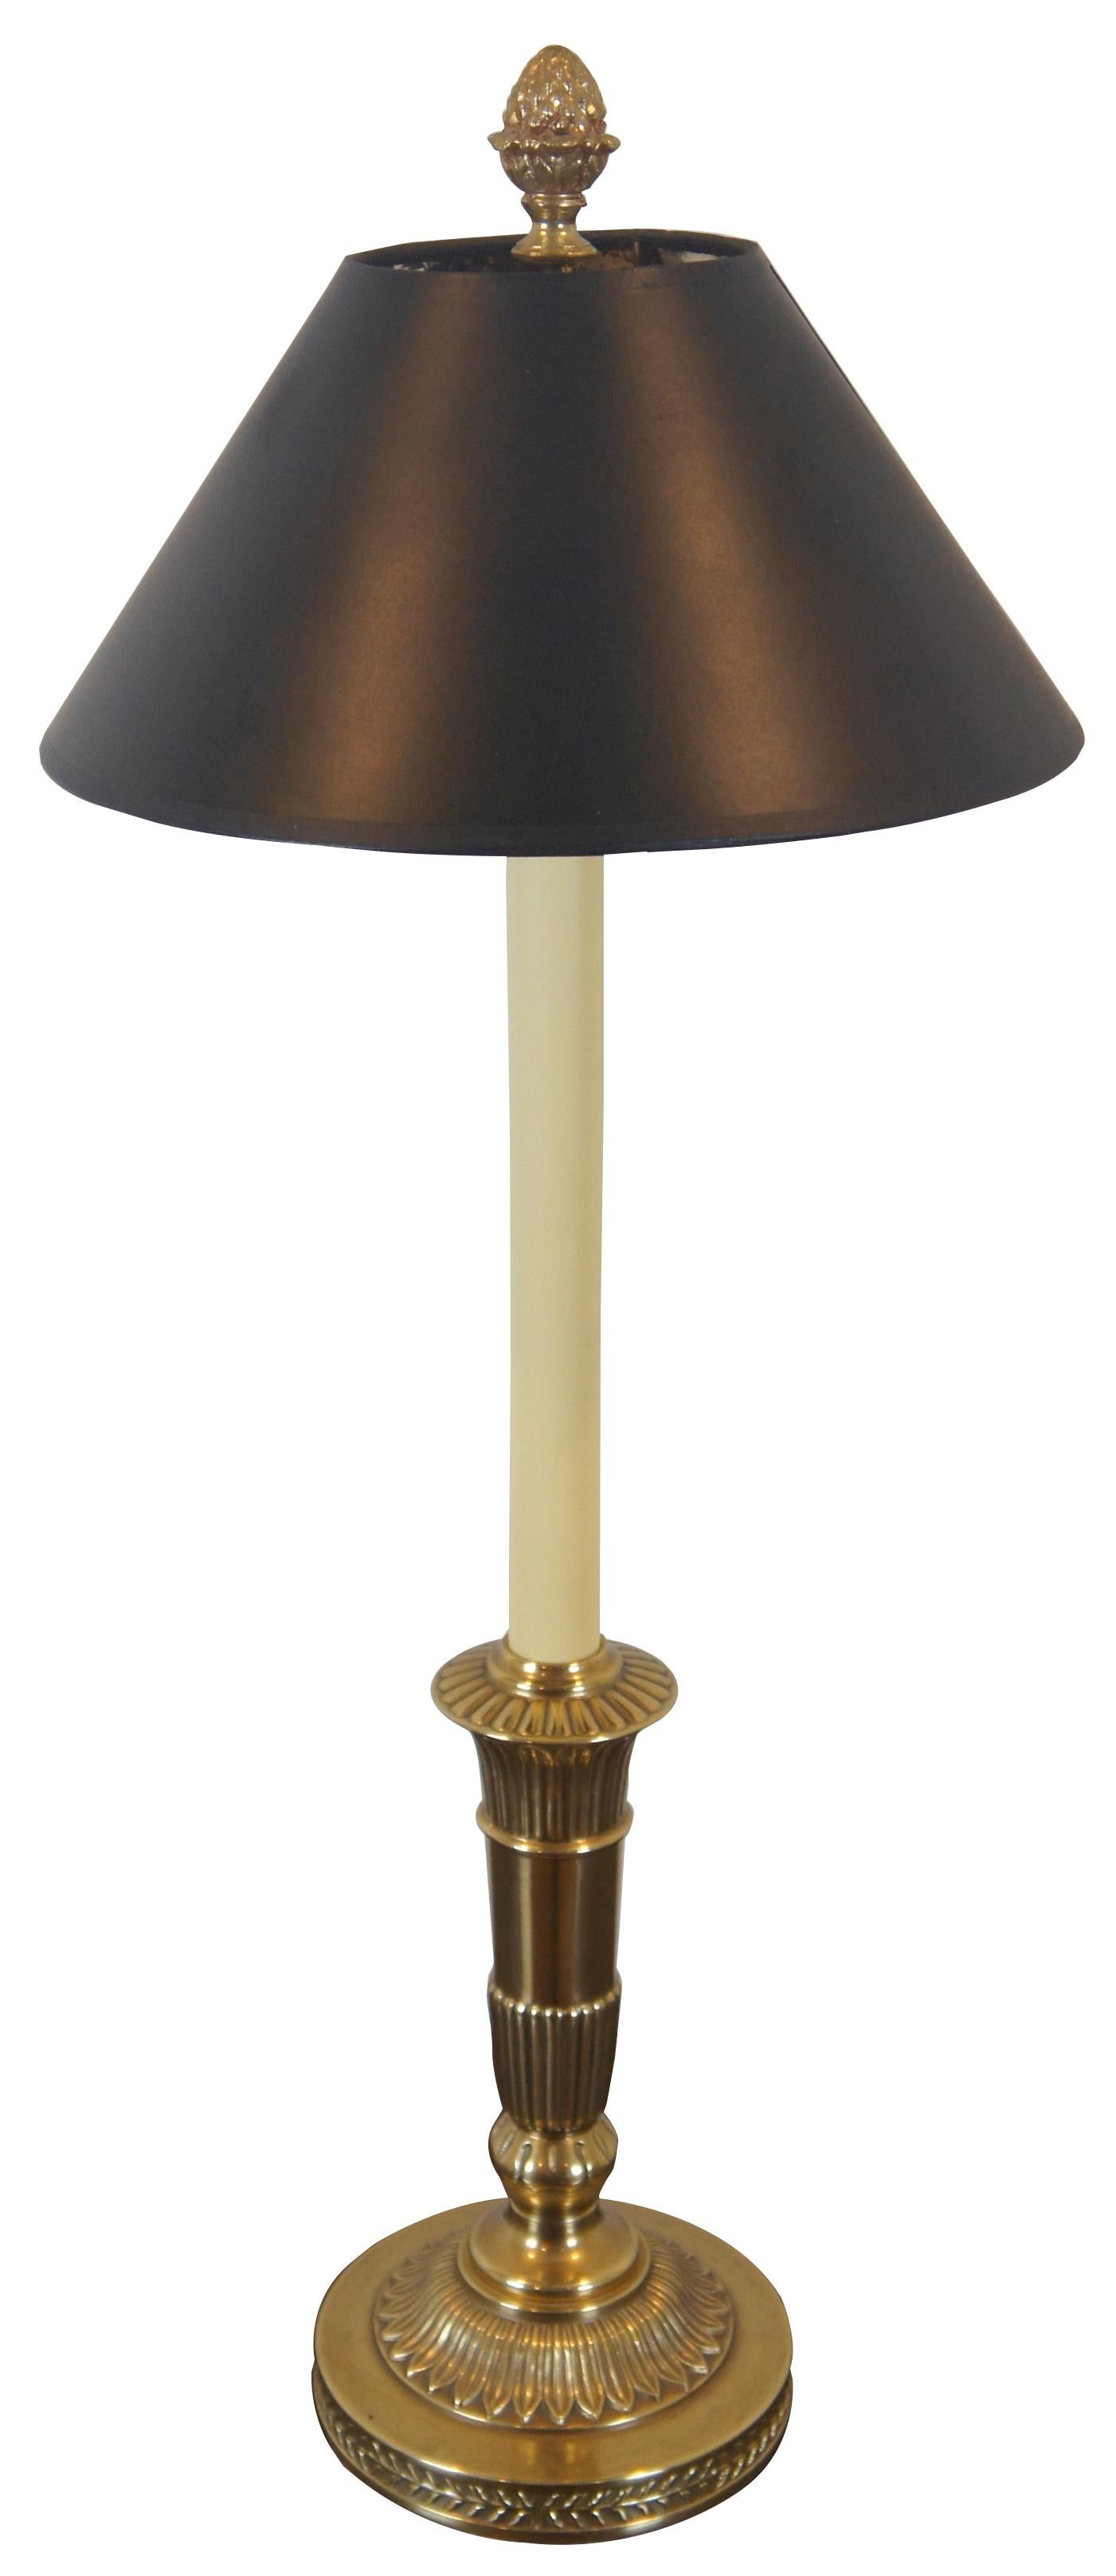 Robert Abbey Inc brass candlestick shaped table lamp with acorn finial and black shade with reflective interior.

Measures: 7” x 32.5” / Shade - 13” x 6” (diameter x height).
 